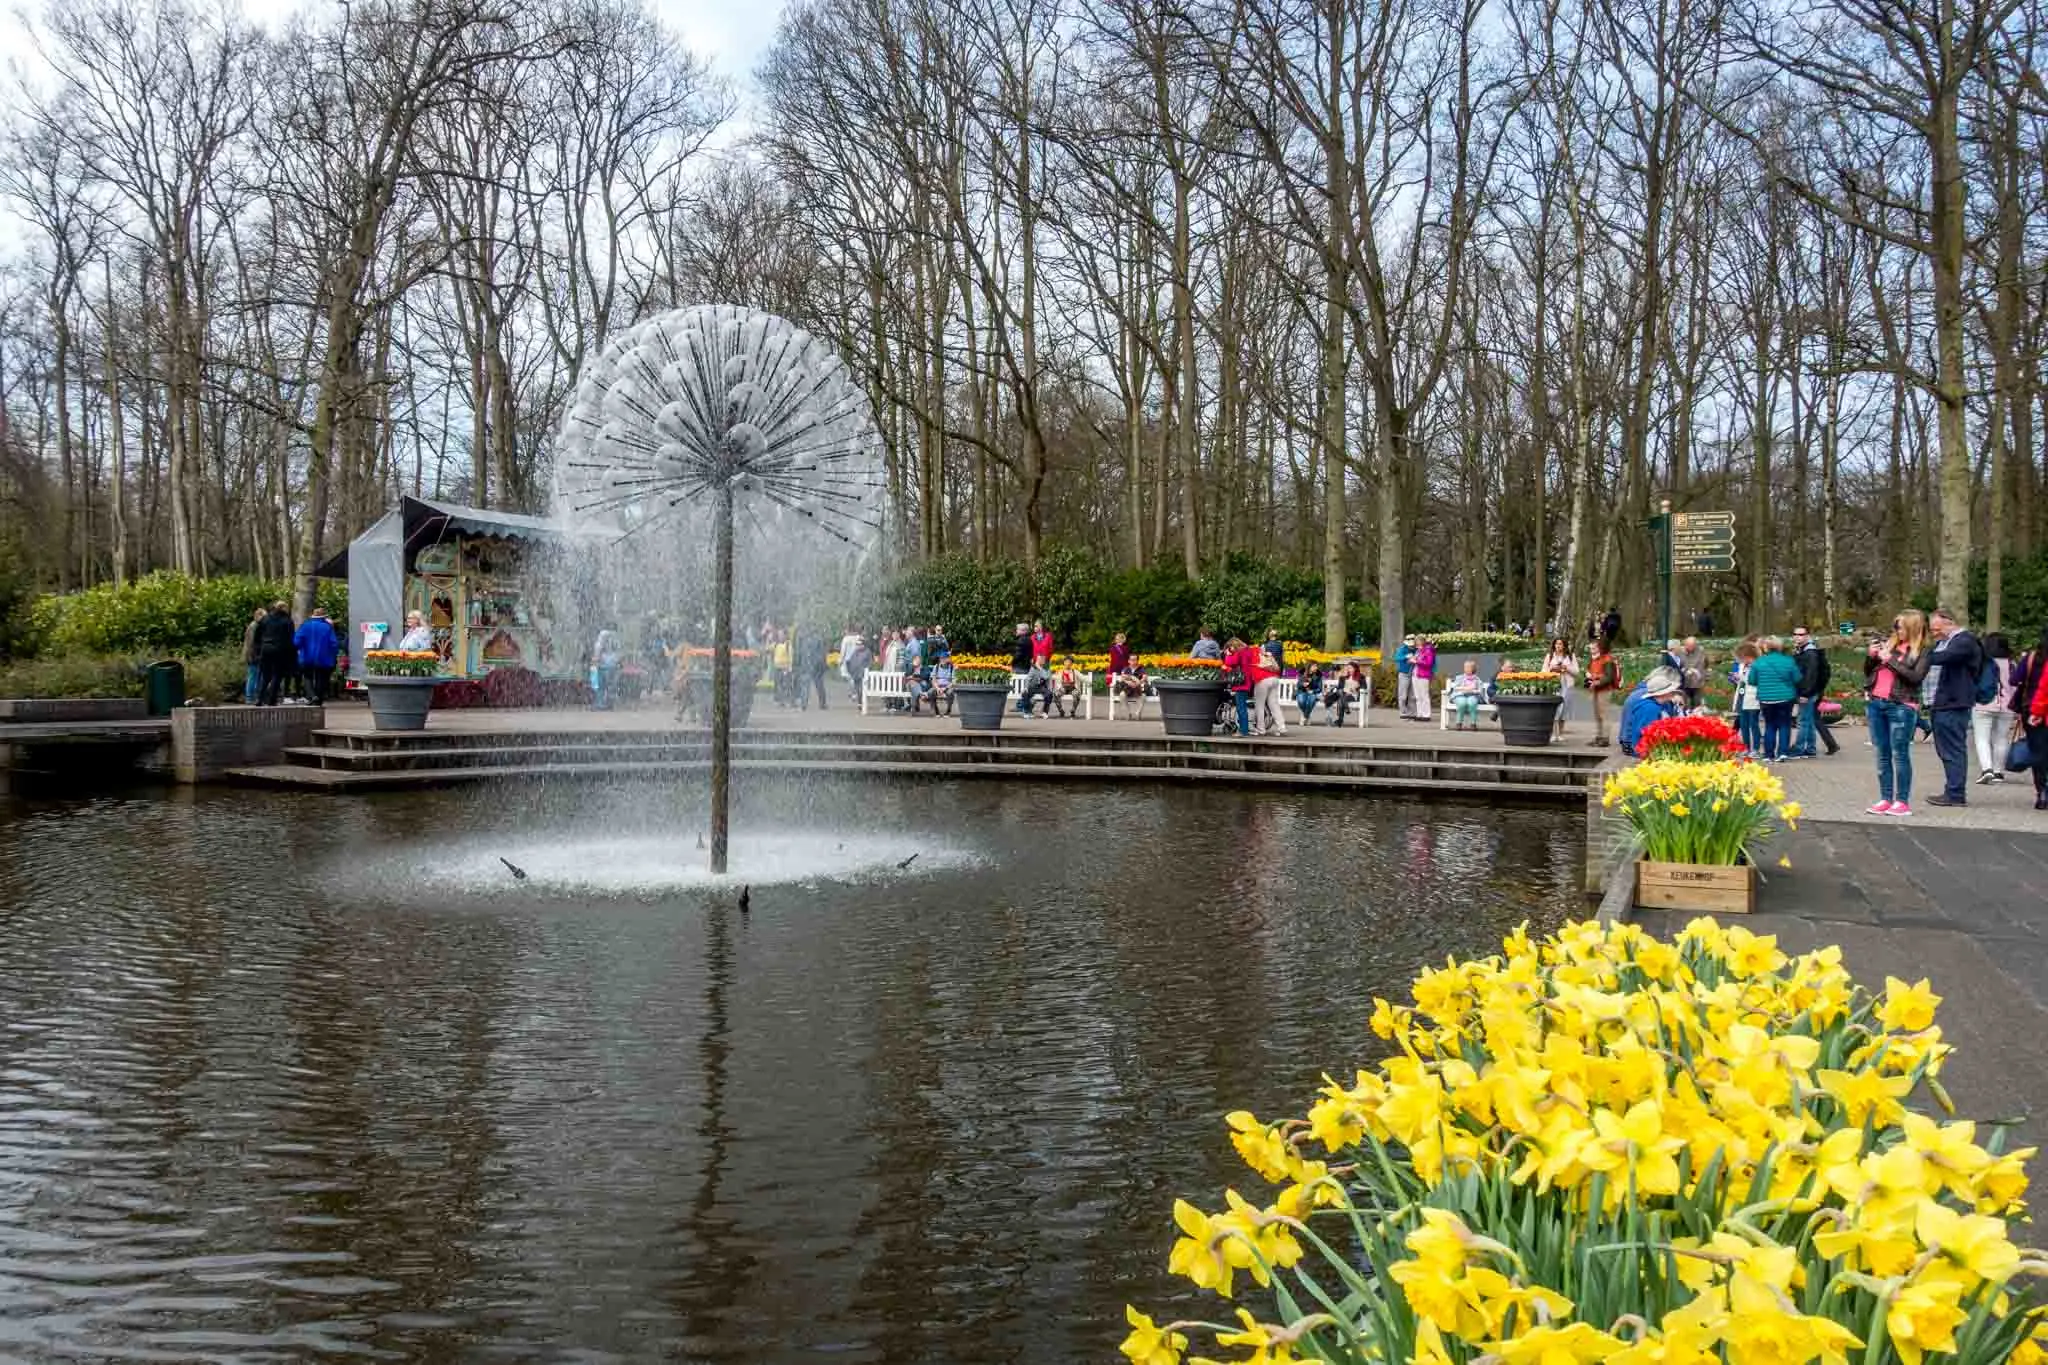 People walking around a pond with a fountain in the middle